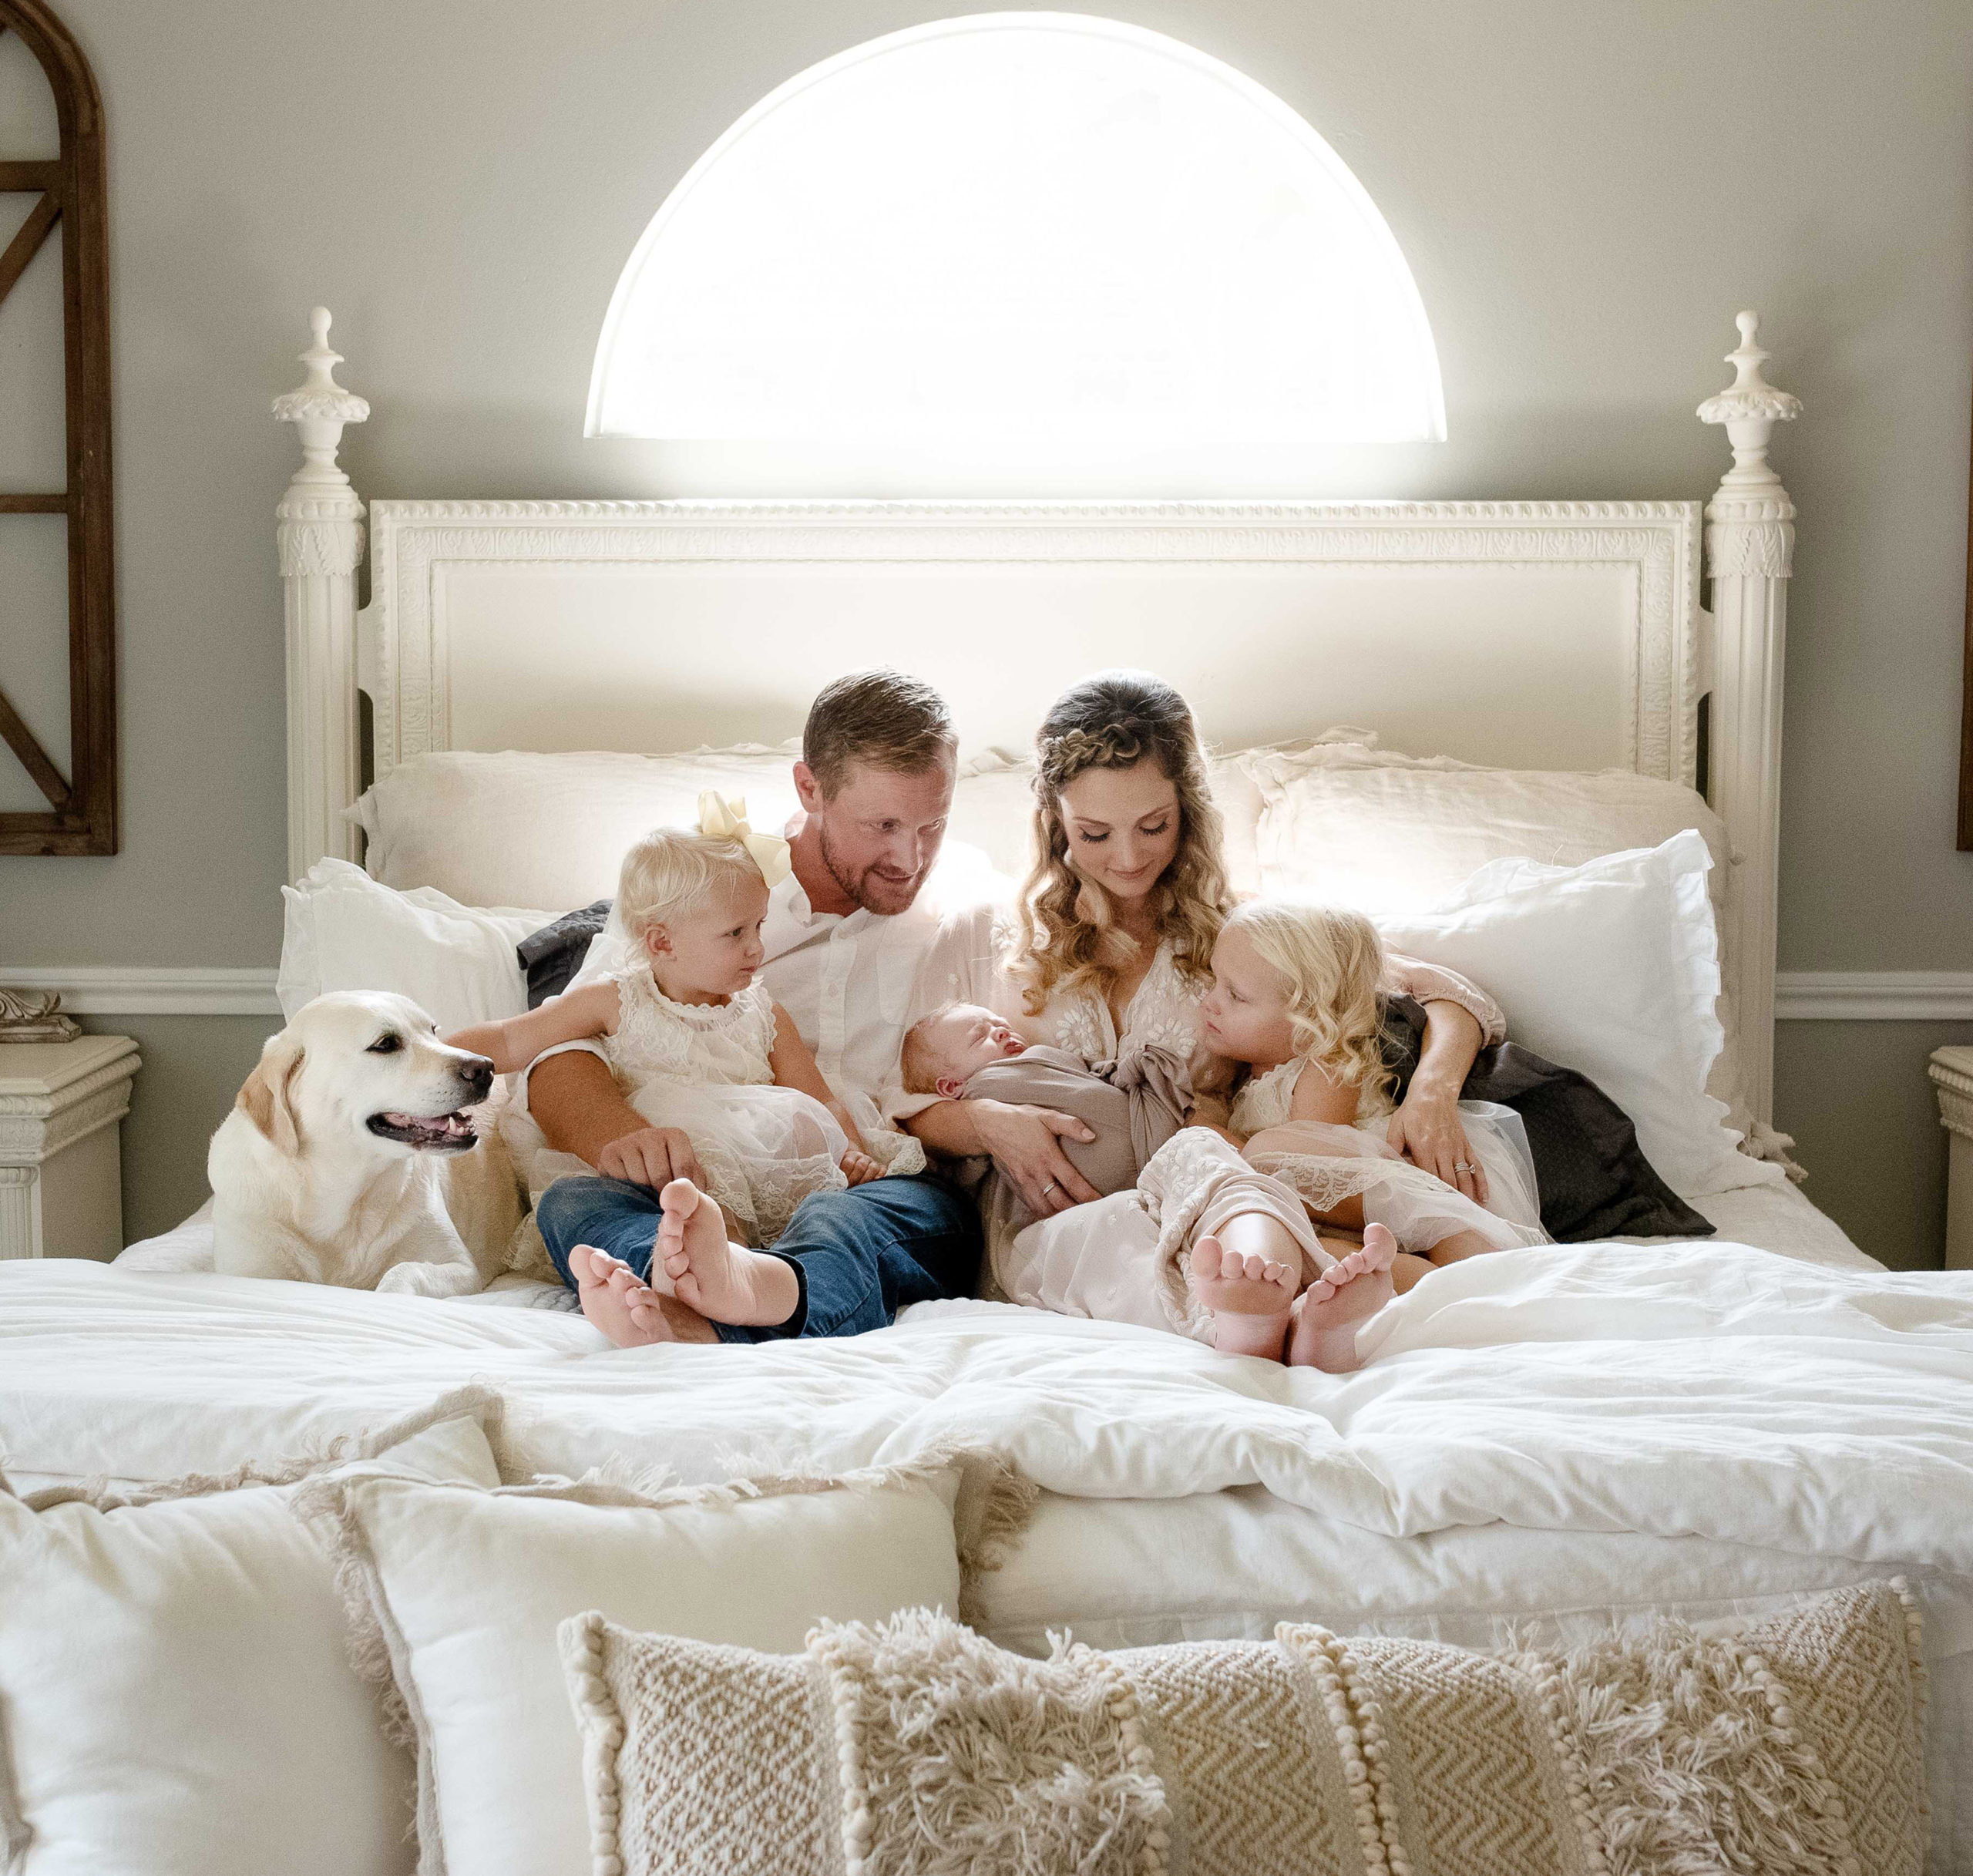 Posing for at-home newborn sessions: the family portrait